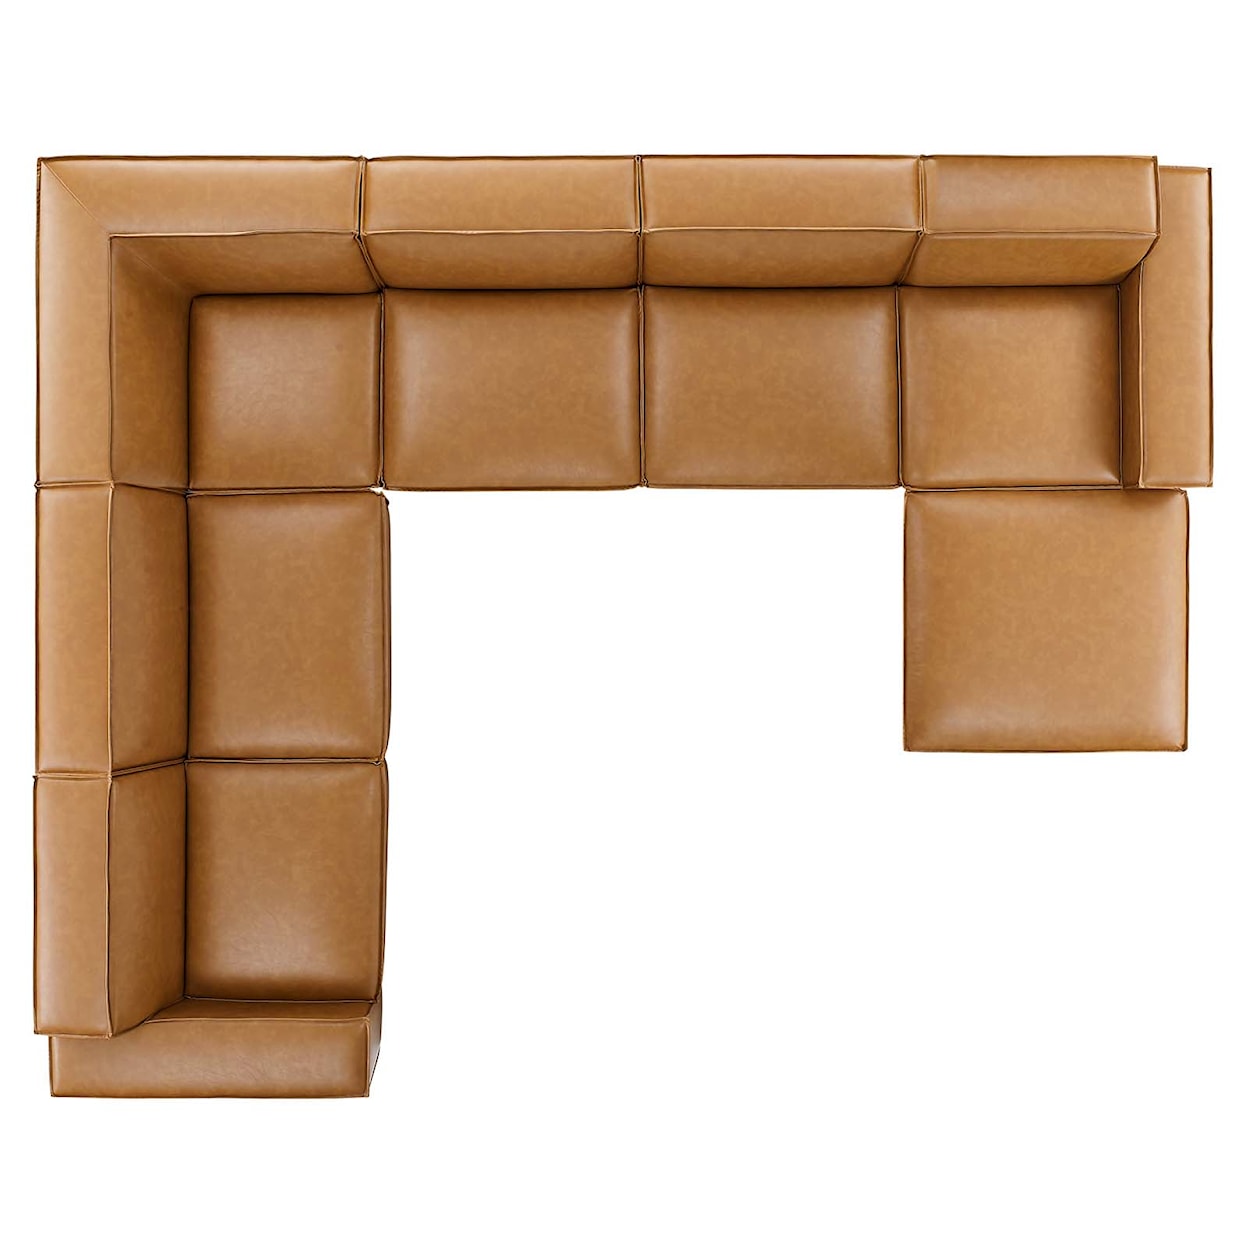 Modway Restore 7-Piece Sectional Sofa